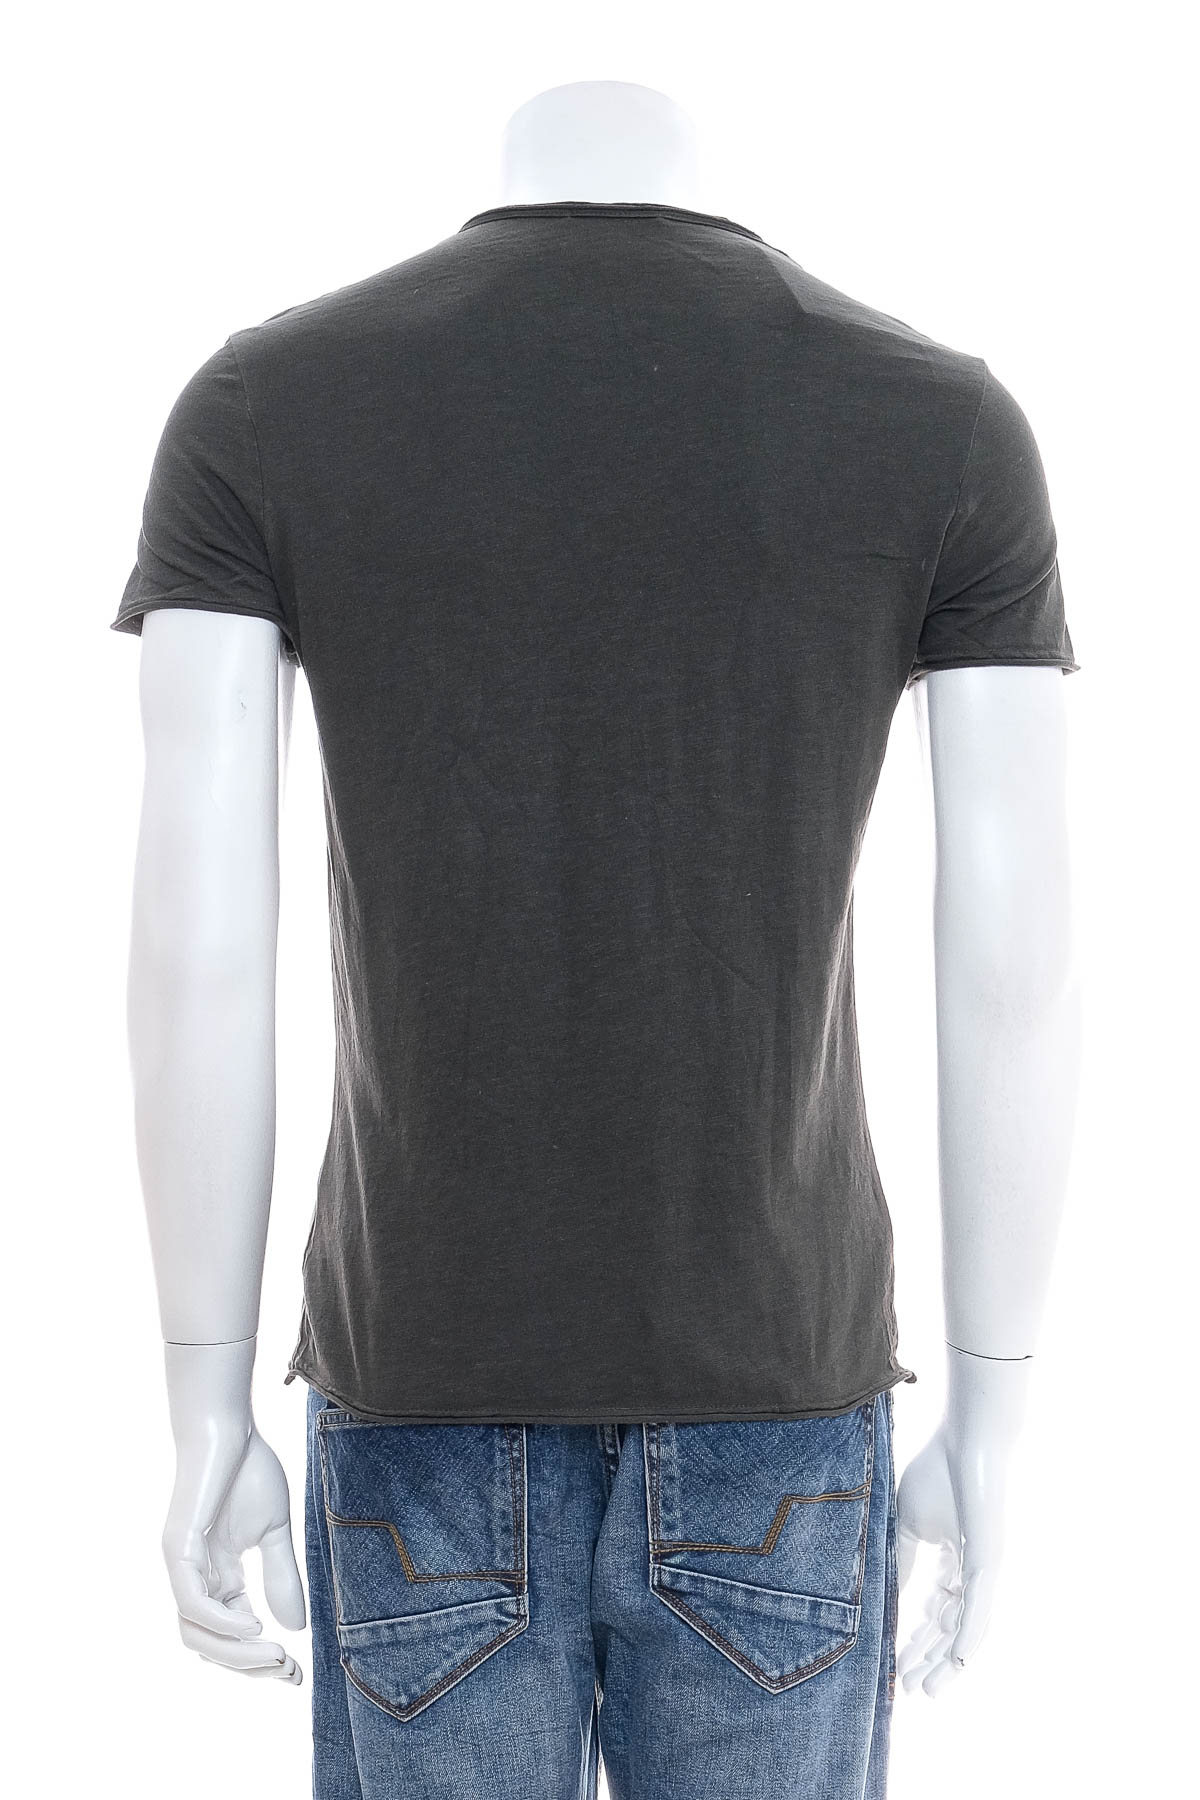 Men's T-shirt - Made in Italy - 1